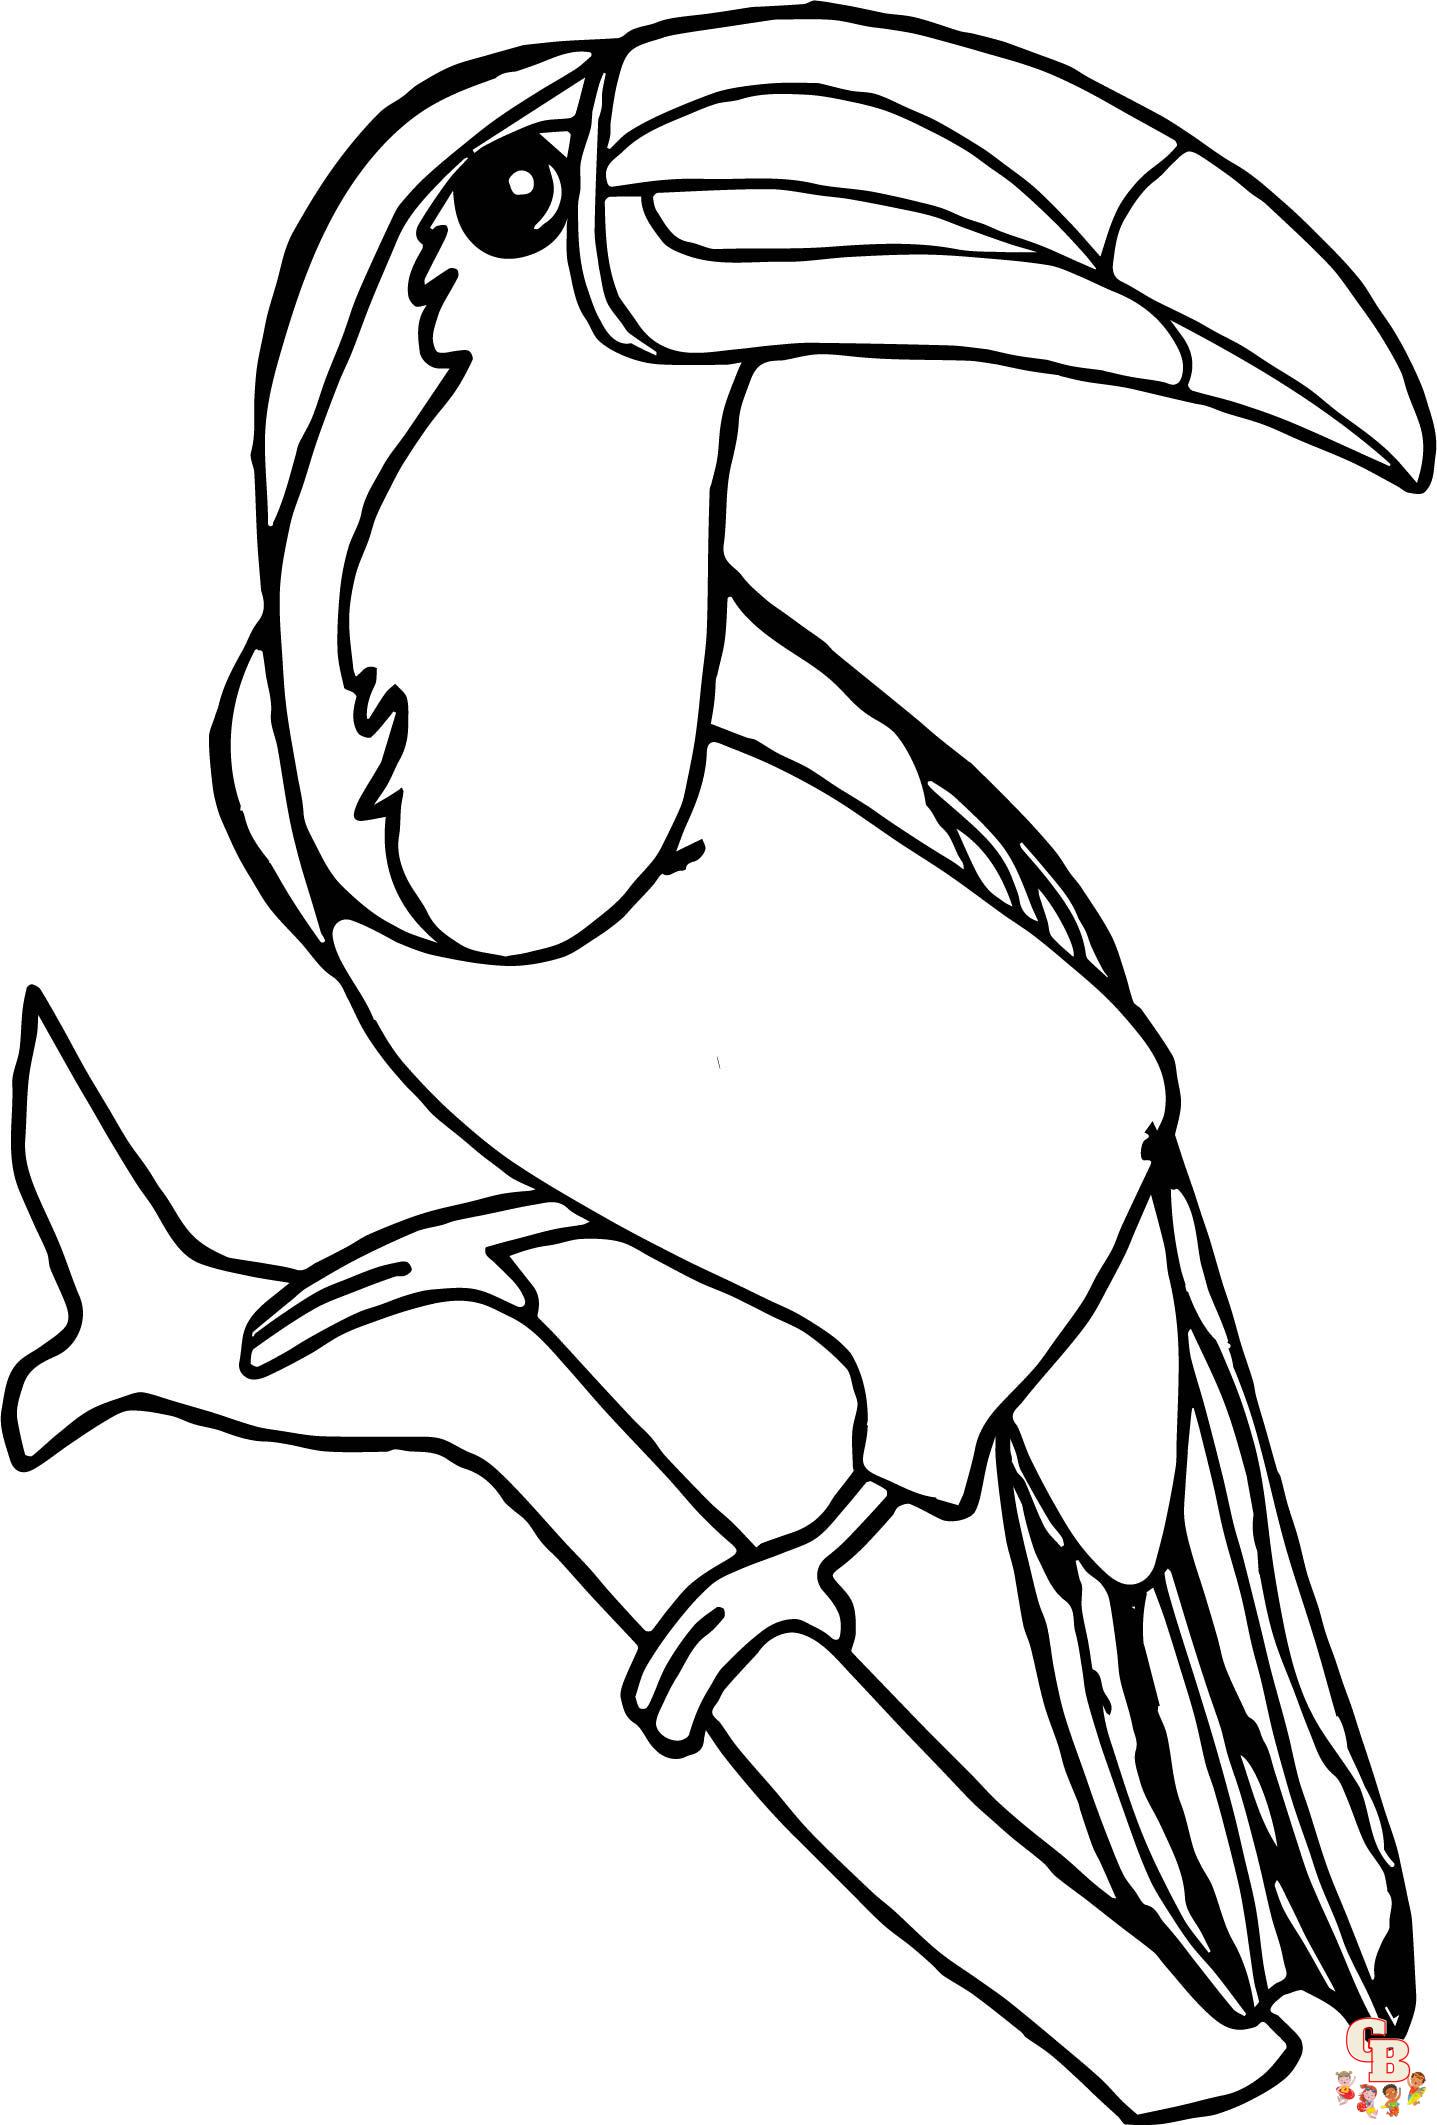 toucan coloring pages 1